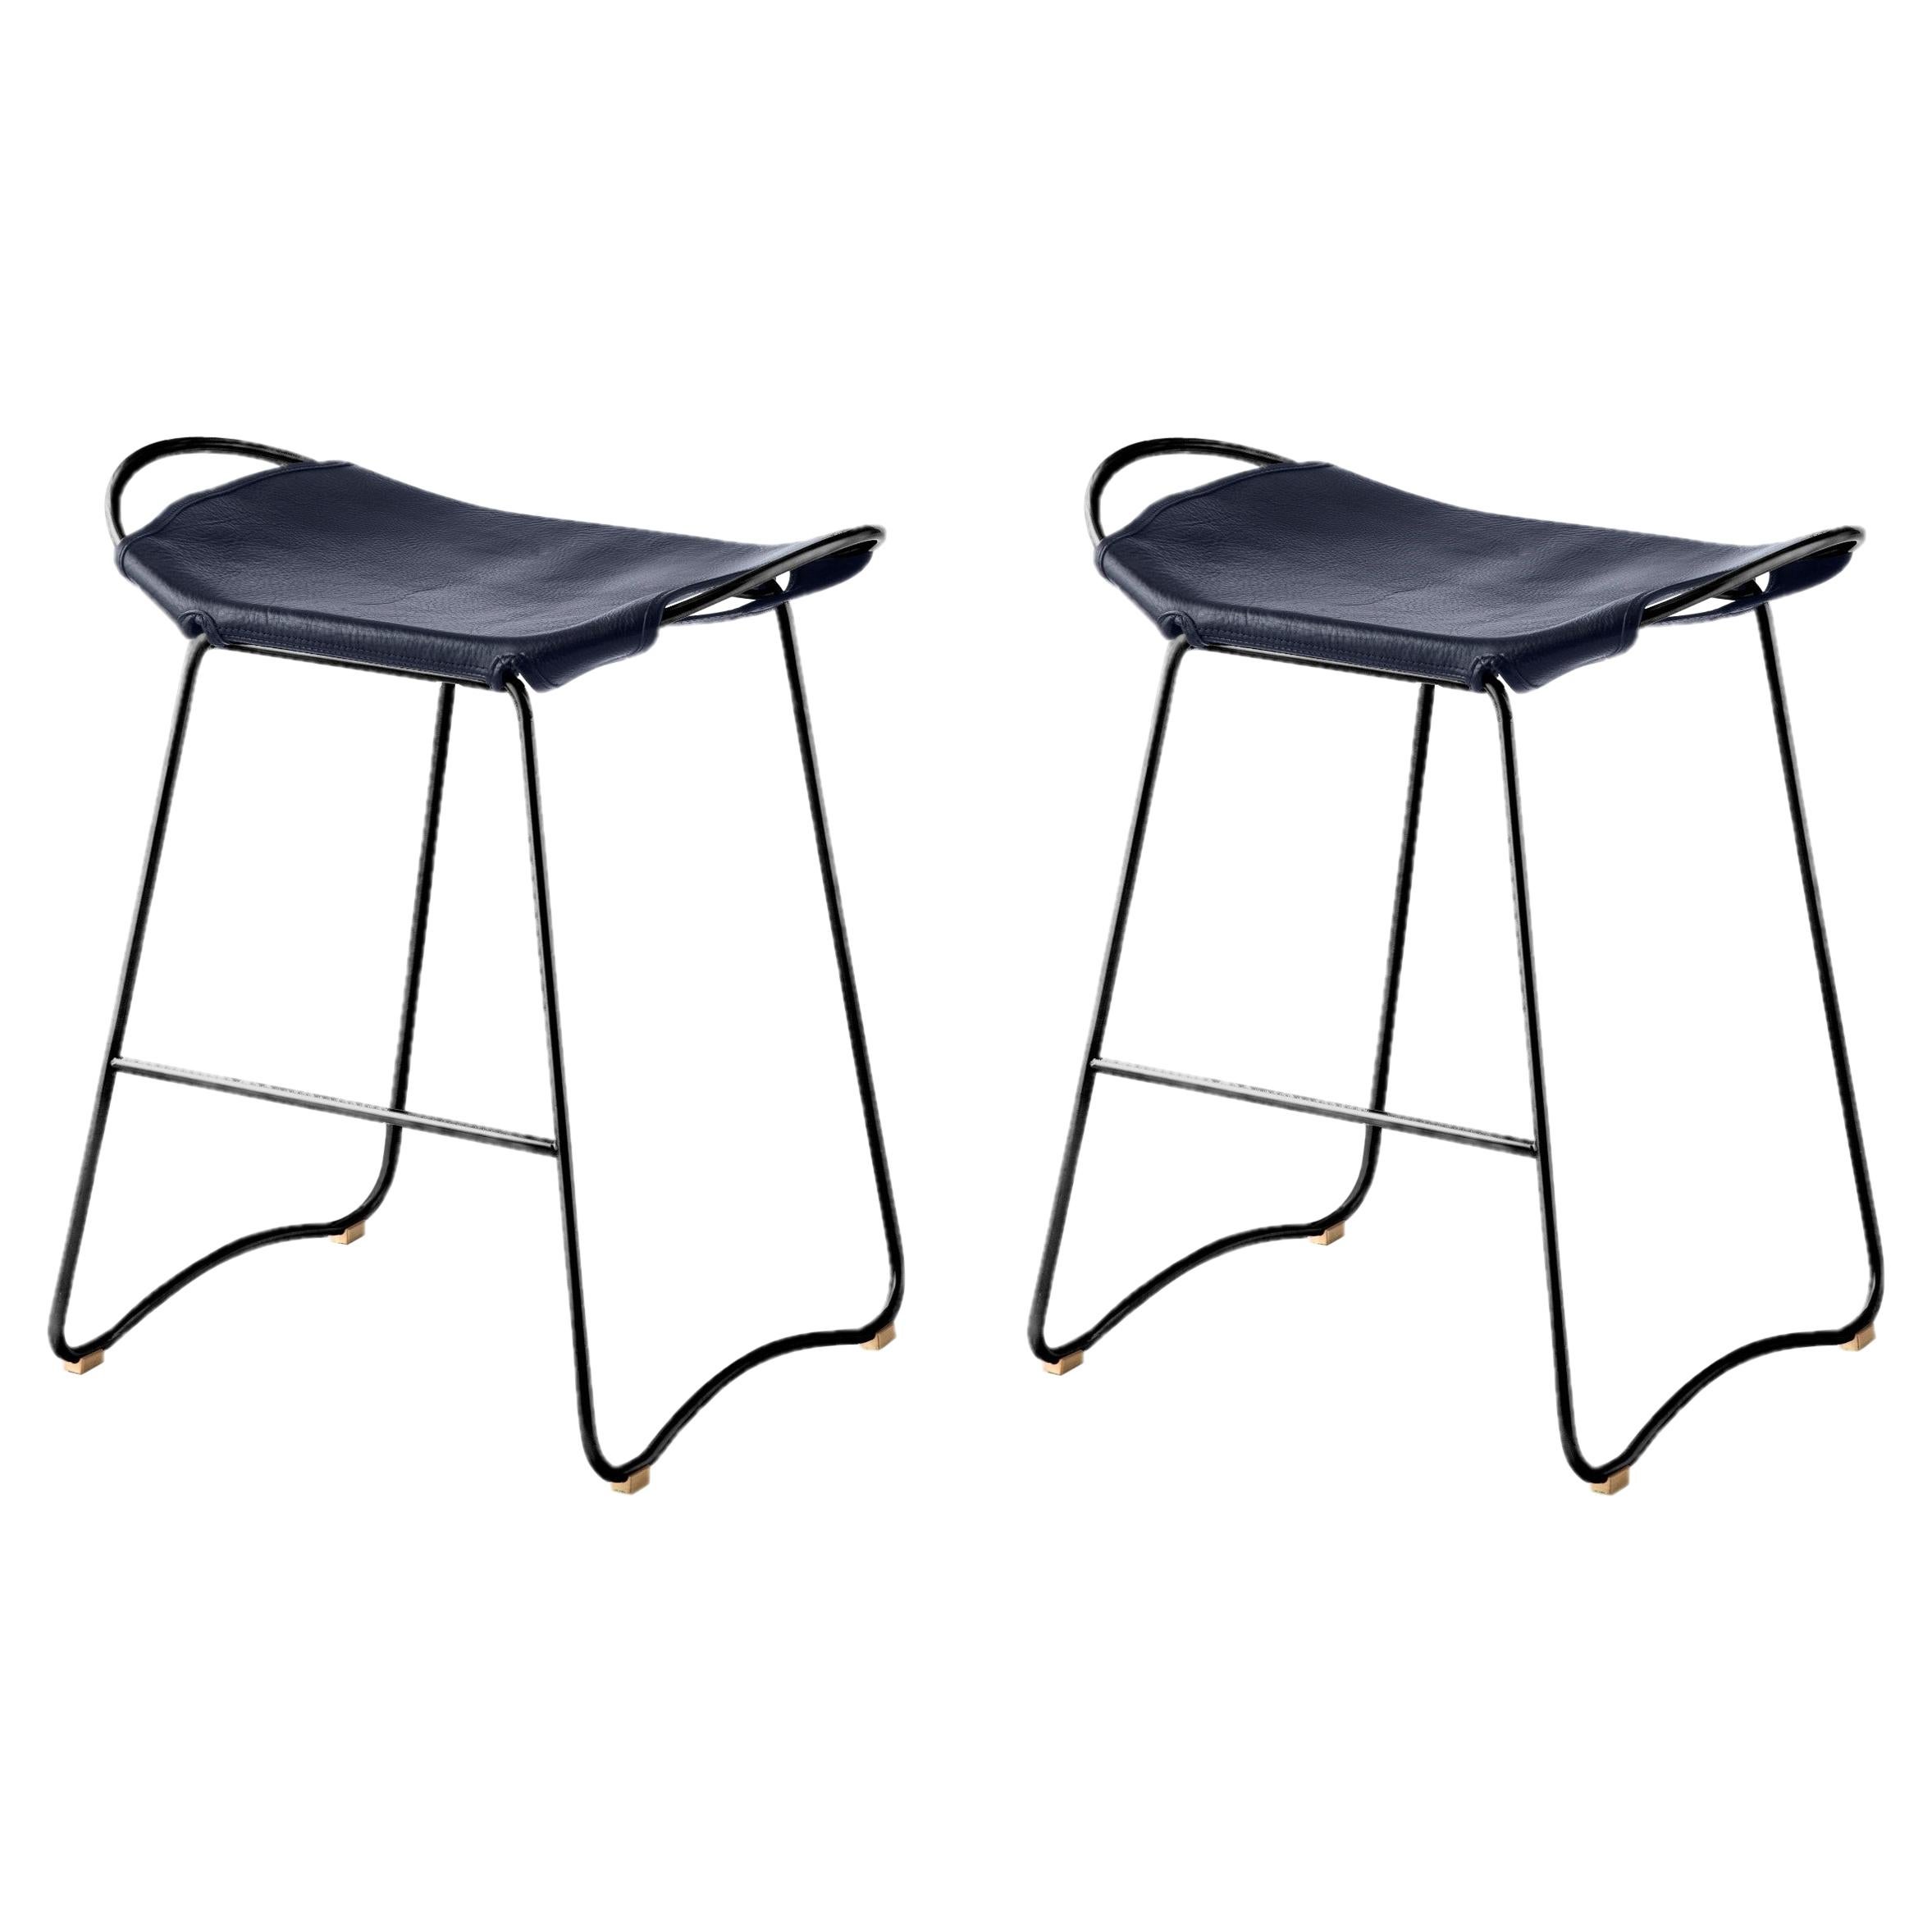 Pair Bar Stool, Black Smoke Metal and Navy Blue Leather, Contemporary Style